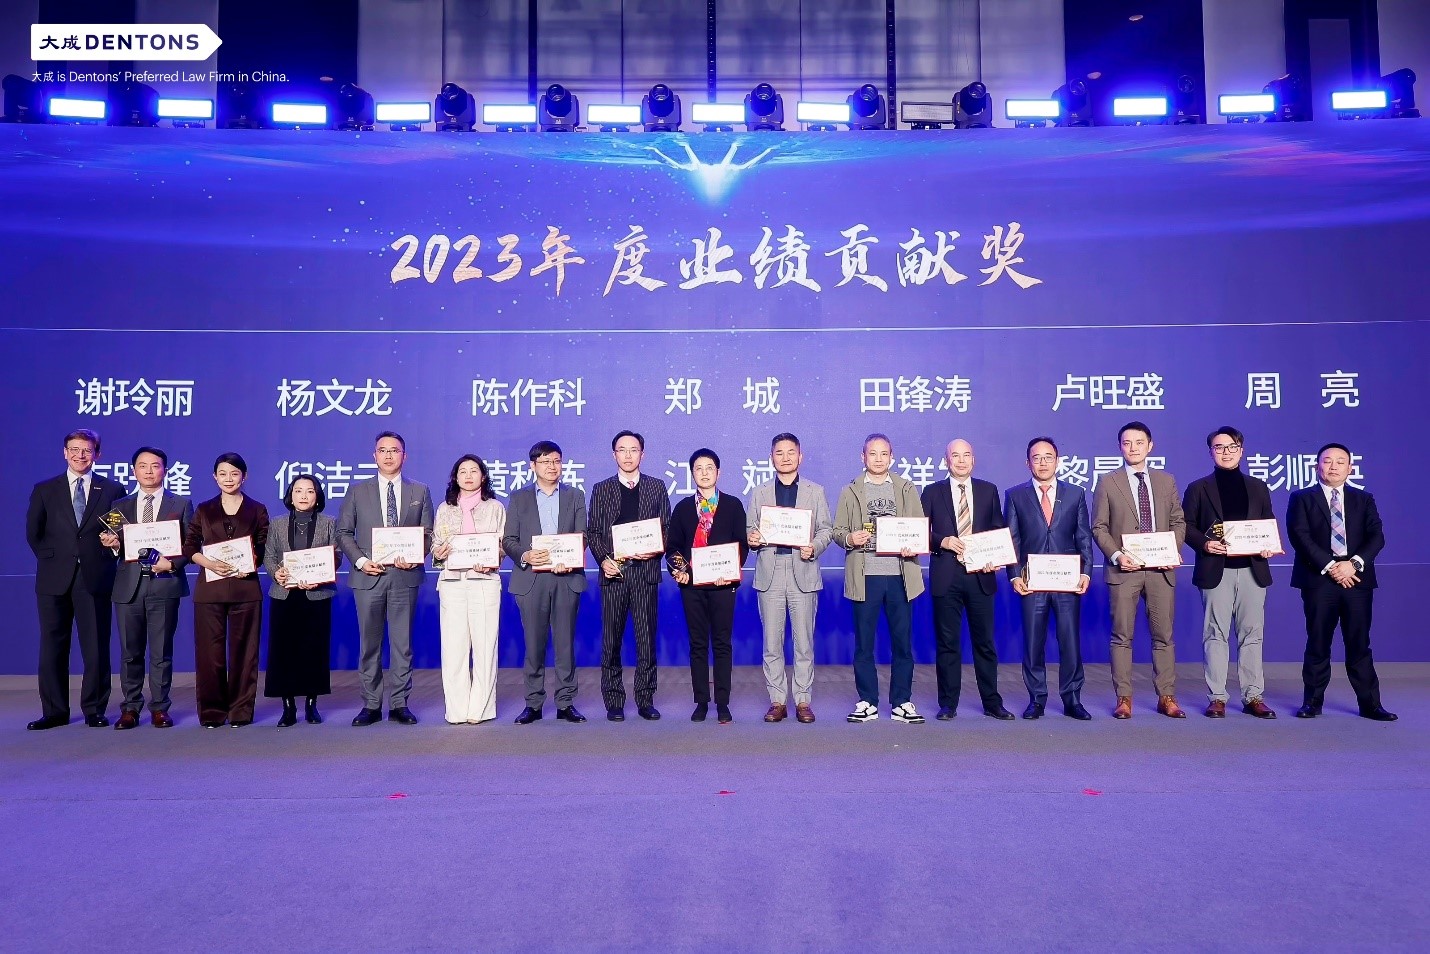 Richard Keady presented the Partner Excellence Award for the outstanding performance of Dacheng Guangzhou Office in 2023